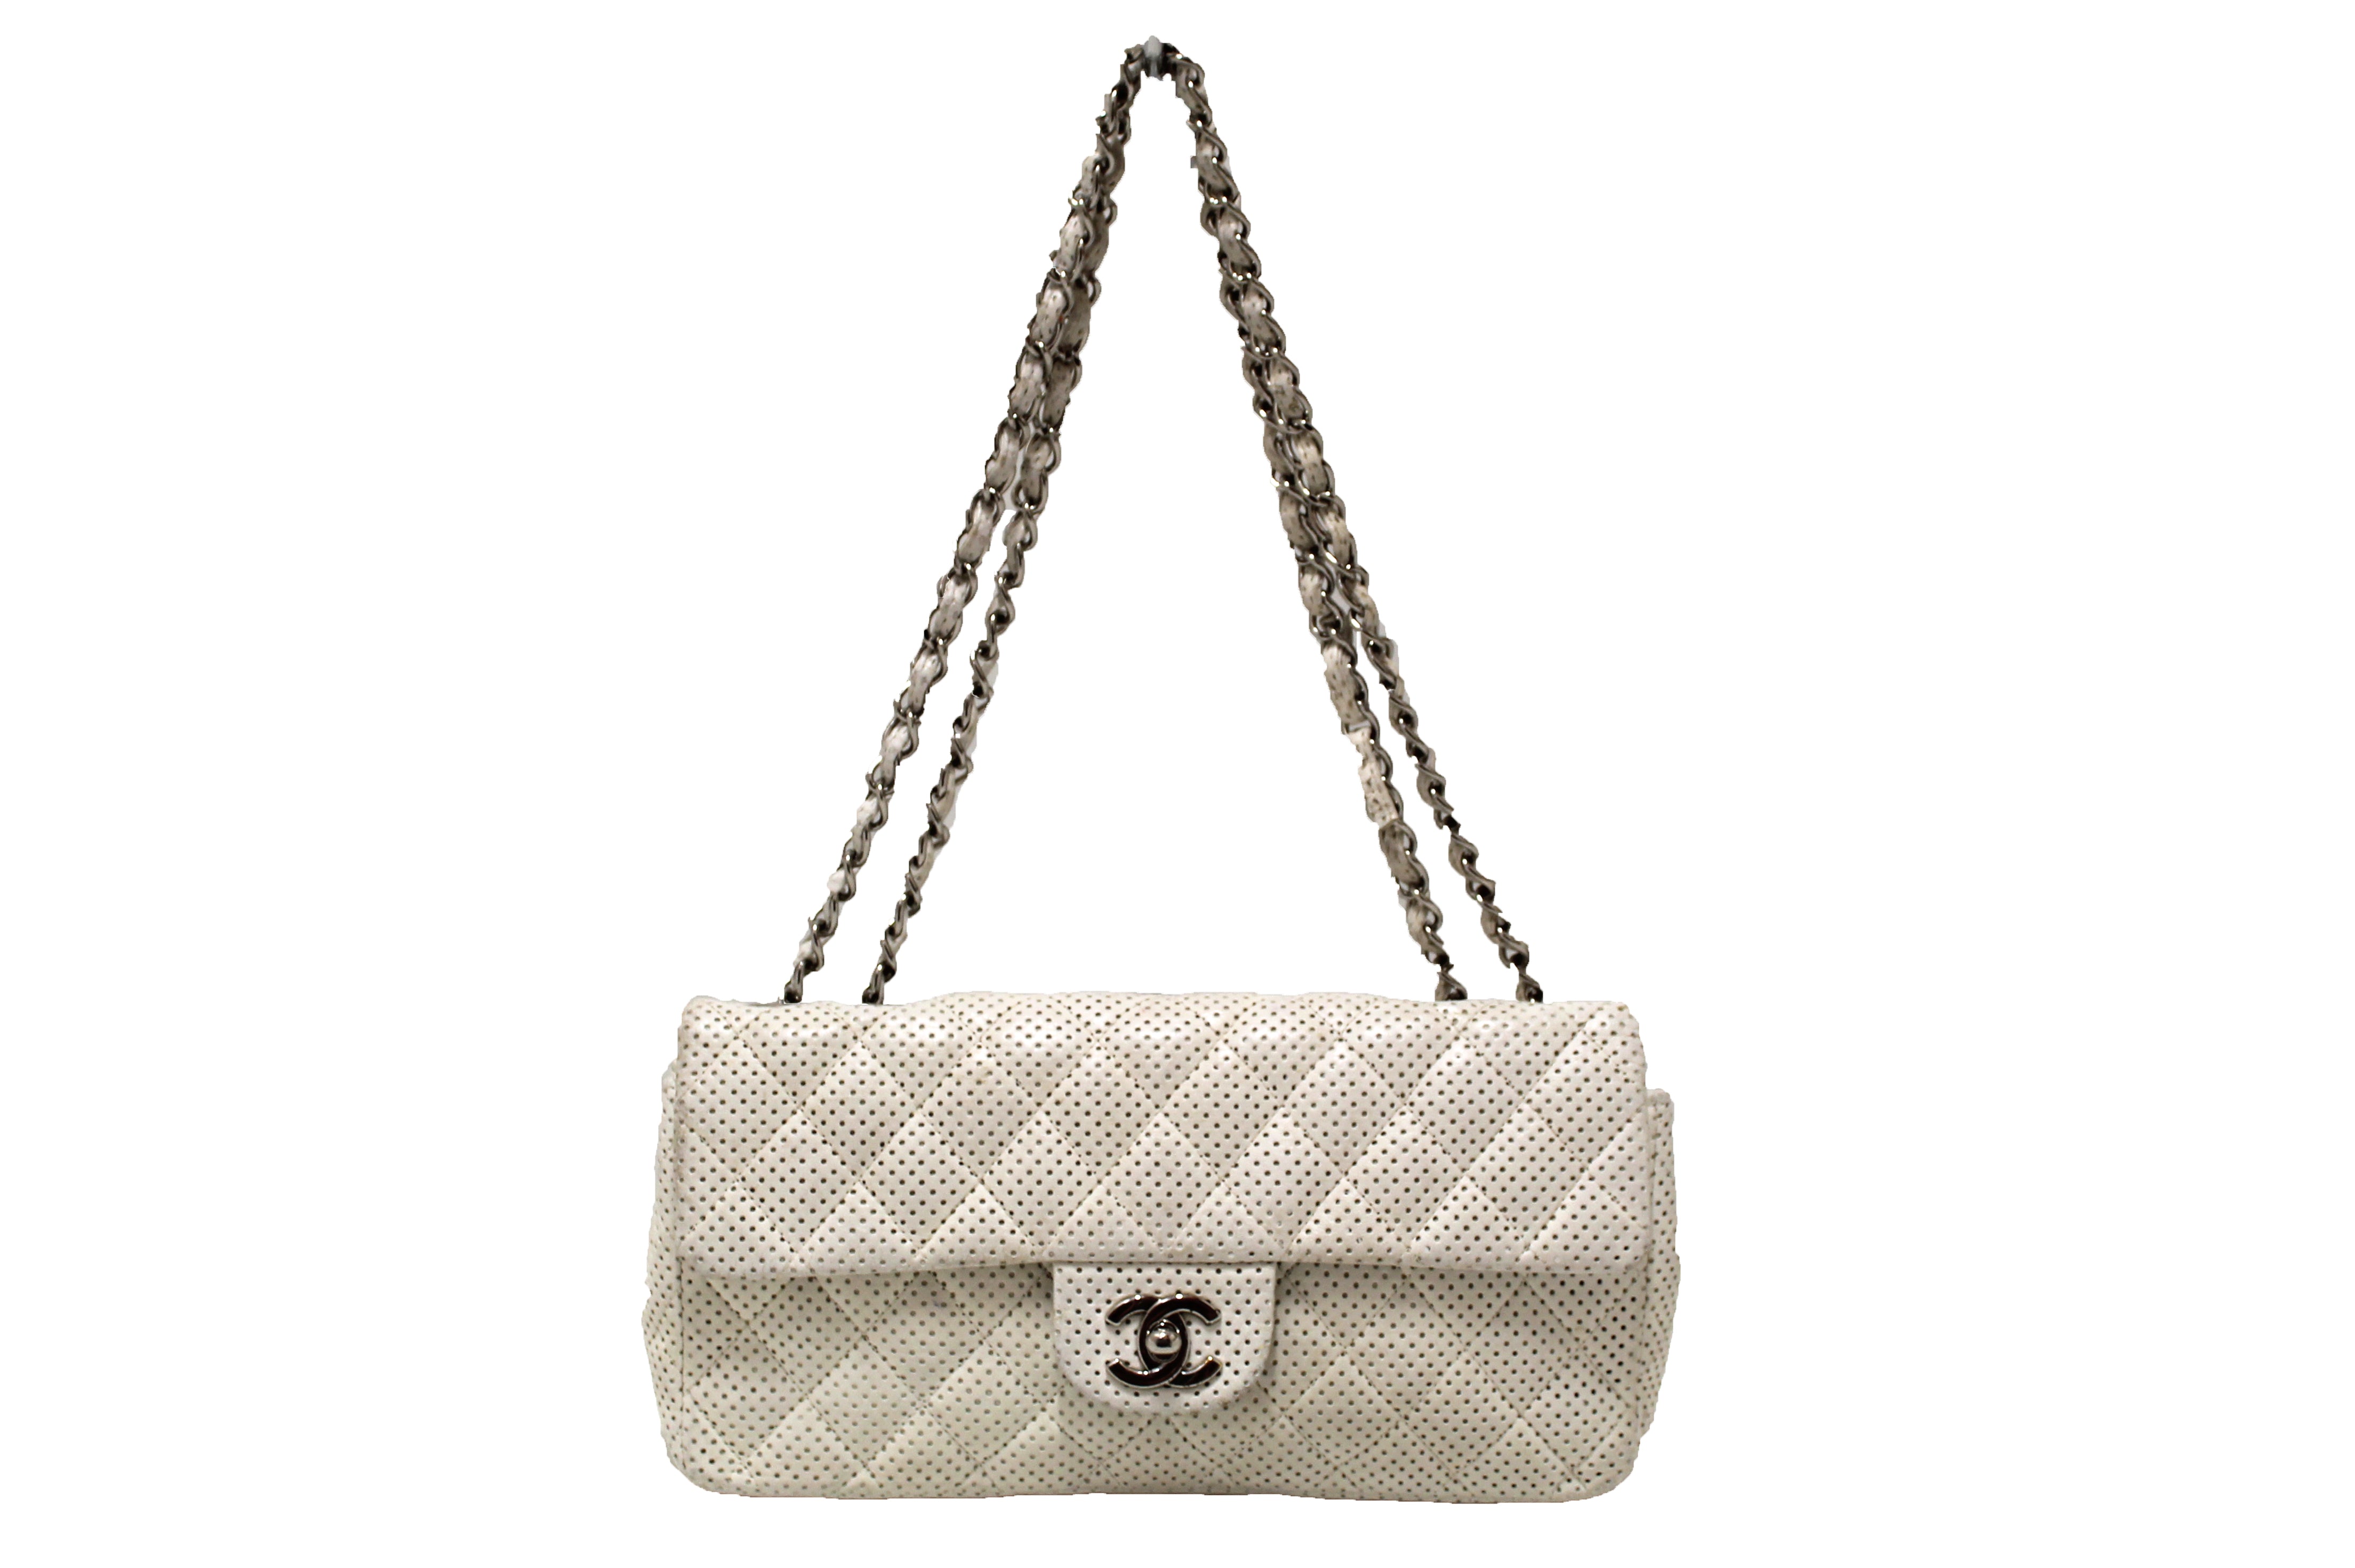 Authentic Chanel Quilted Perforated White Lambskin East West Flap Shoulder Bag